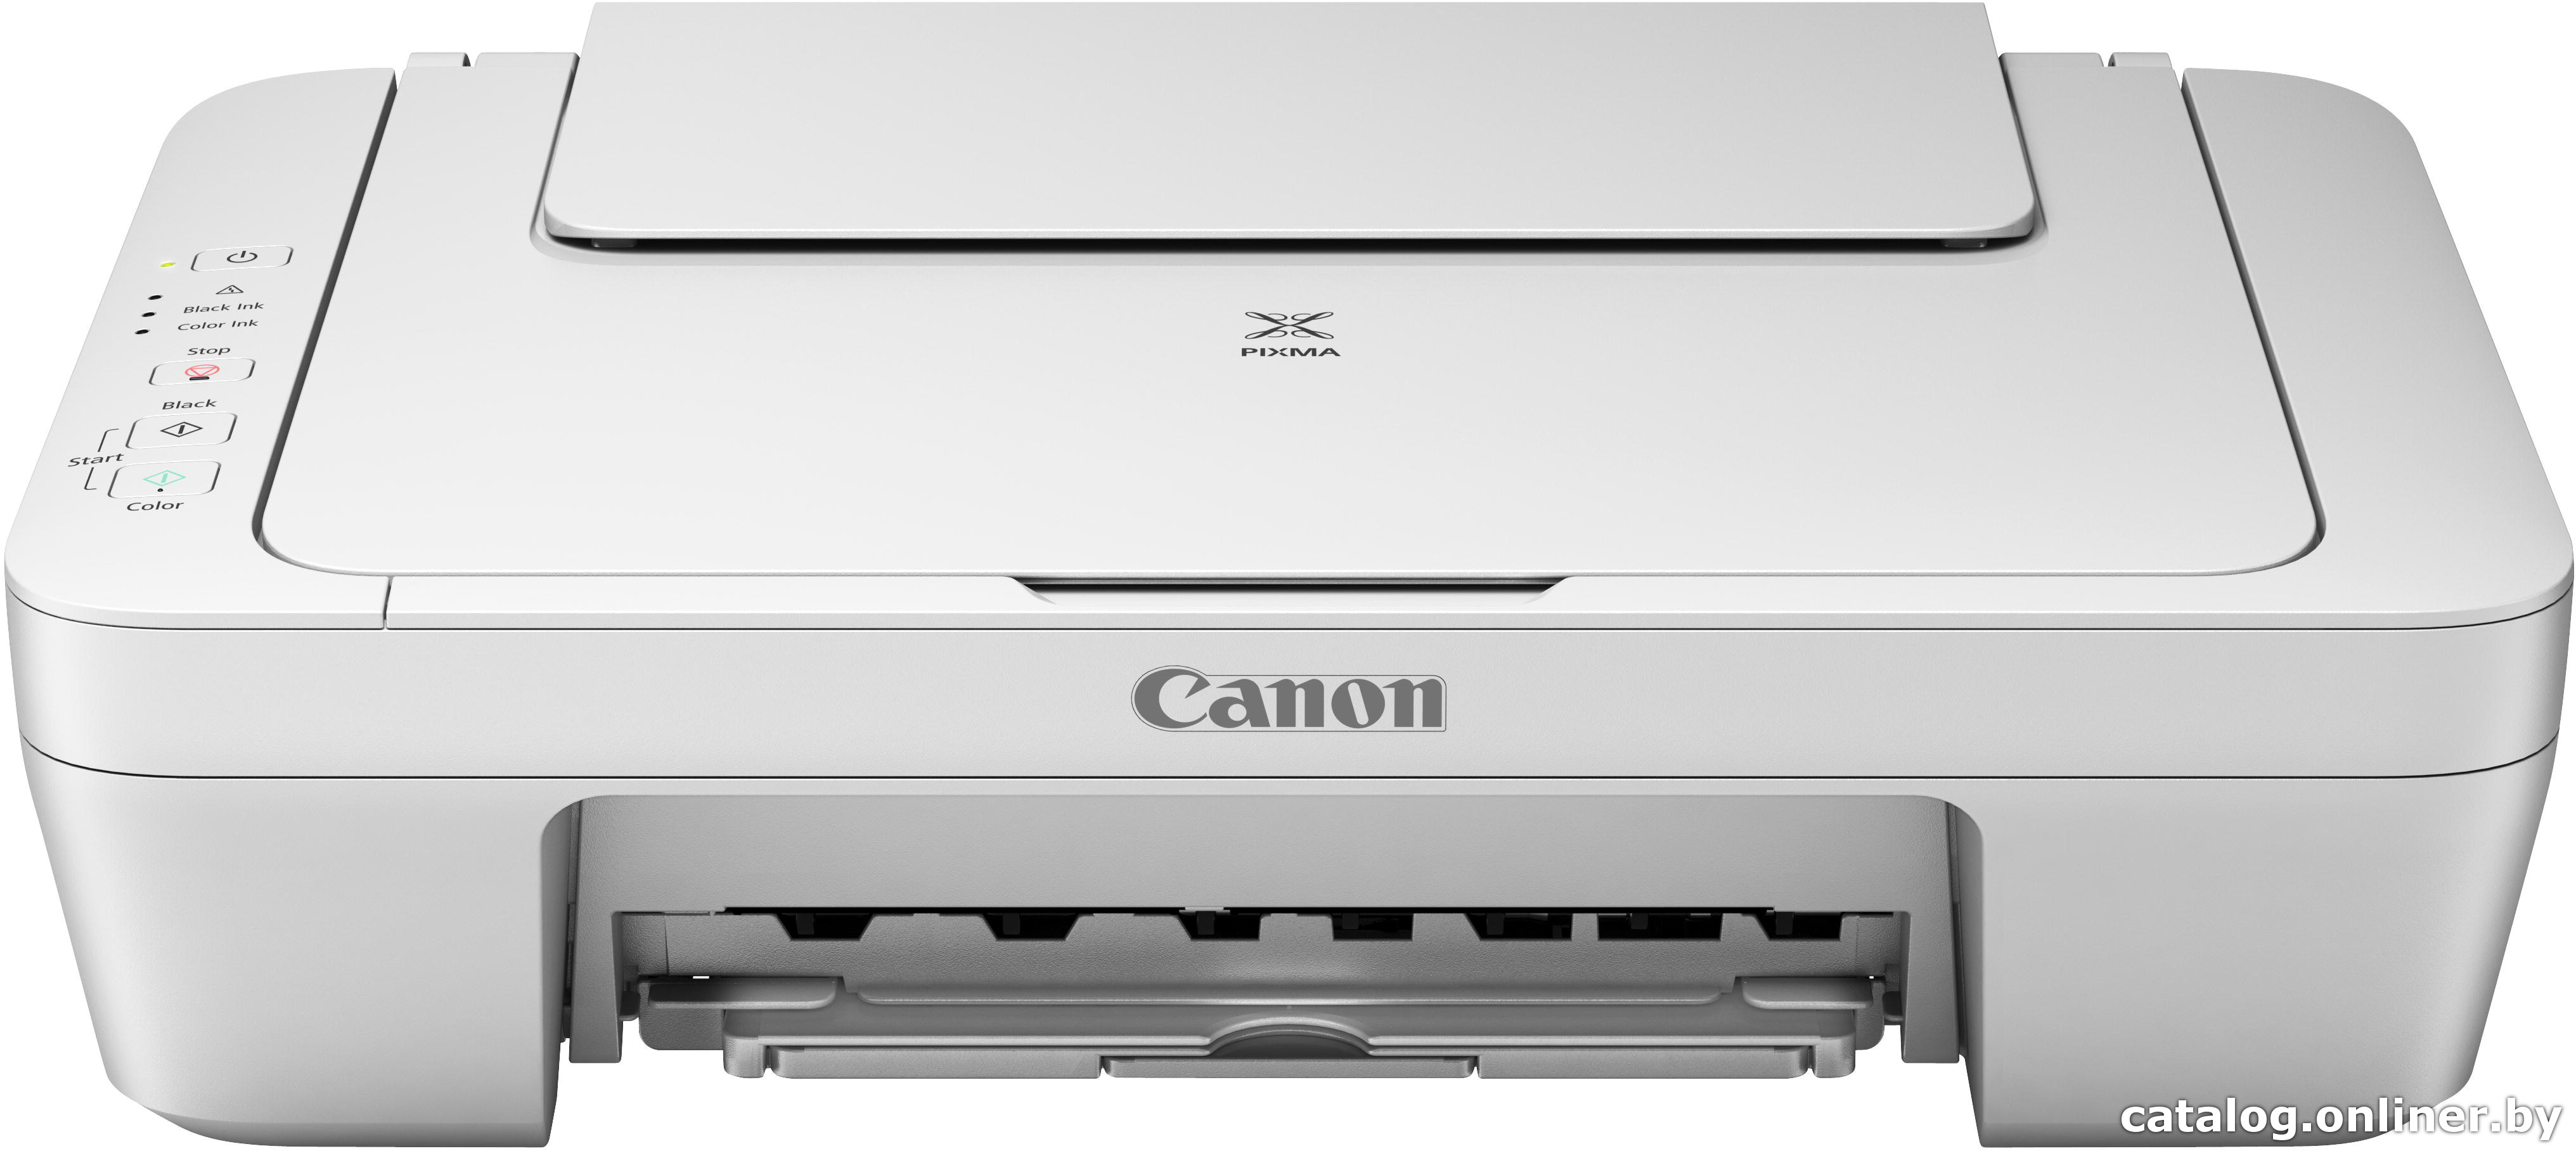 Canon MG2545S Scanner Driver Mac Sierra 10.12 How to Download and Install - Featured